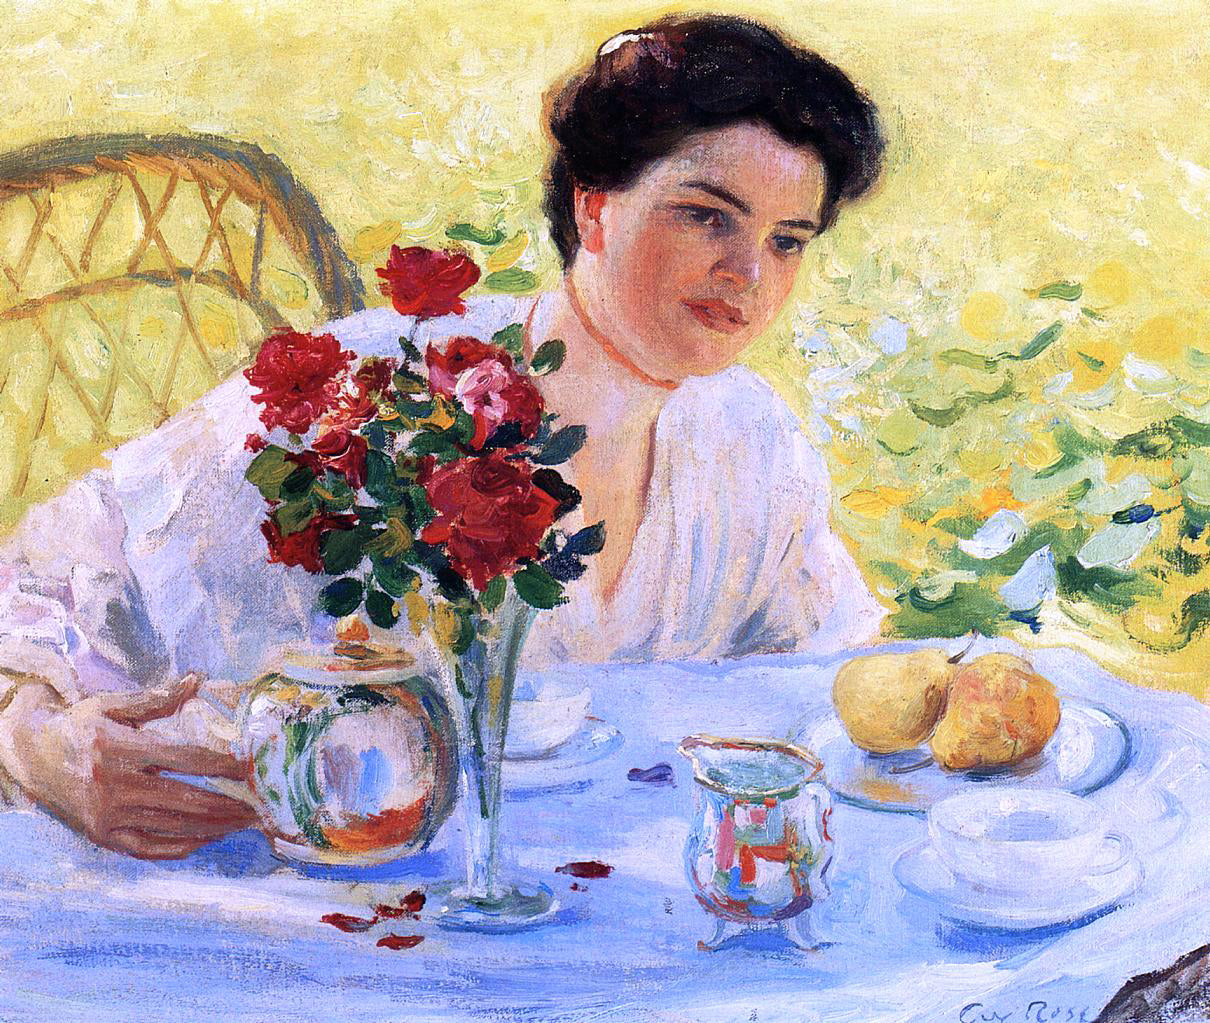  Guy Orlando Rose At Five O'Clock - Hand Painted Oil Painting